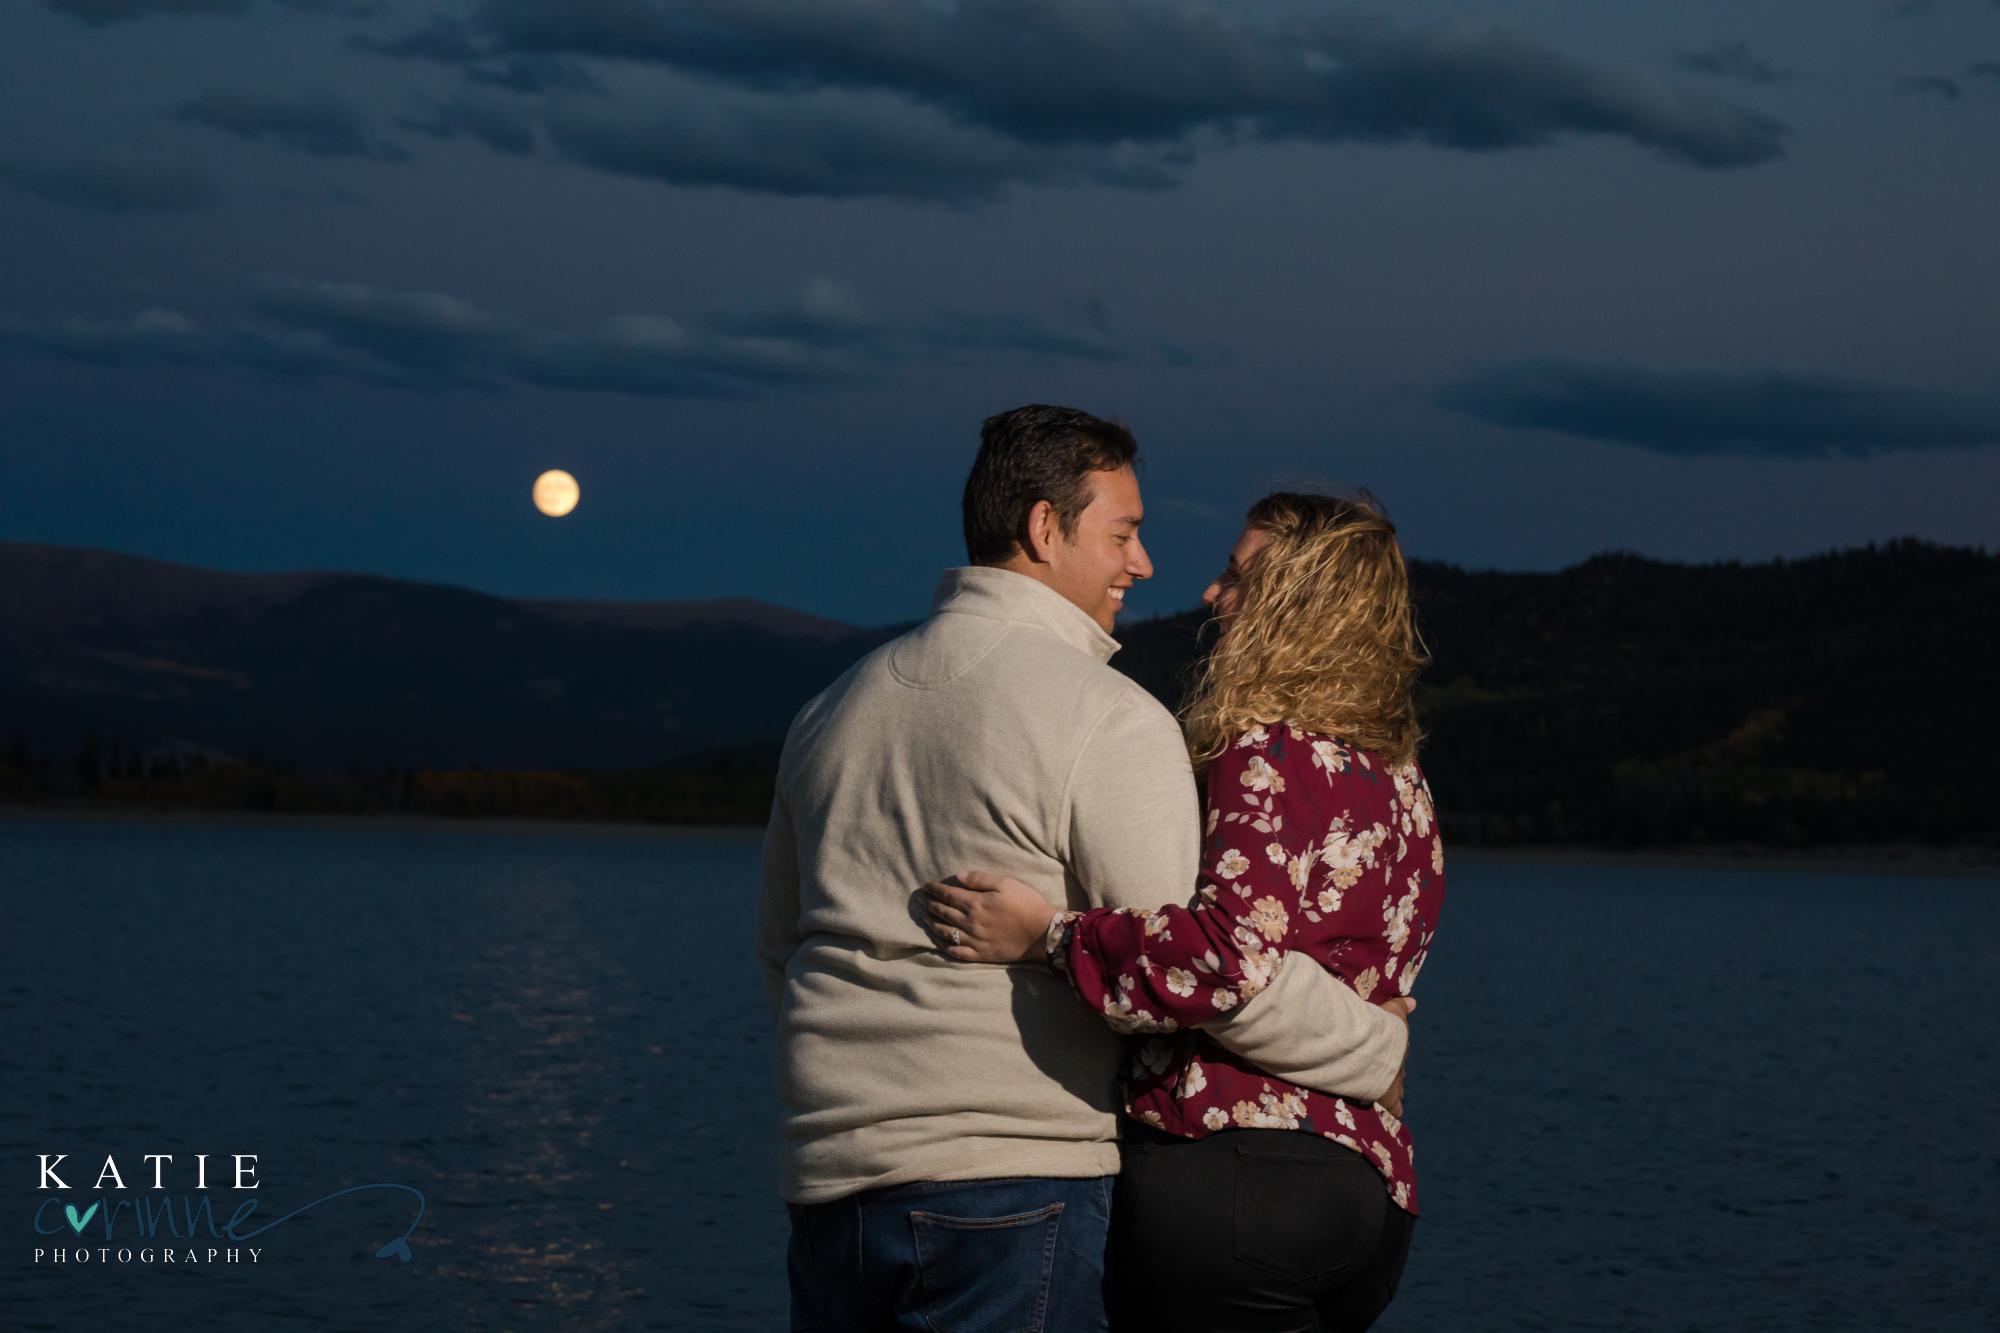 Engaged couple at night in Colorado